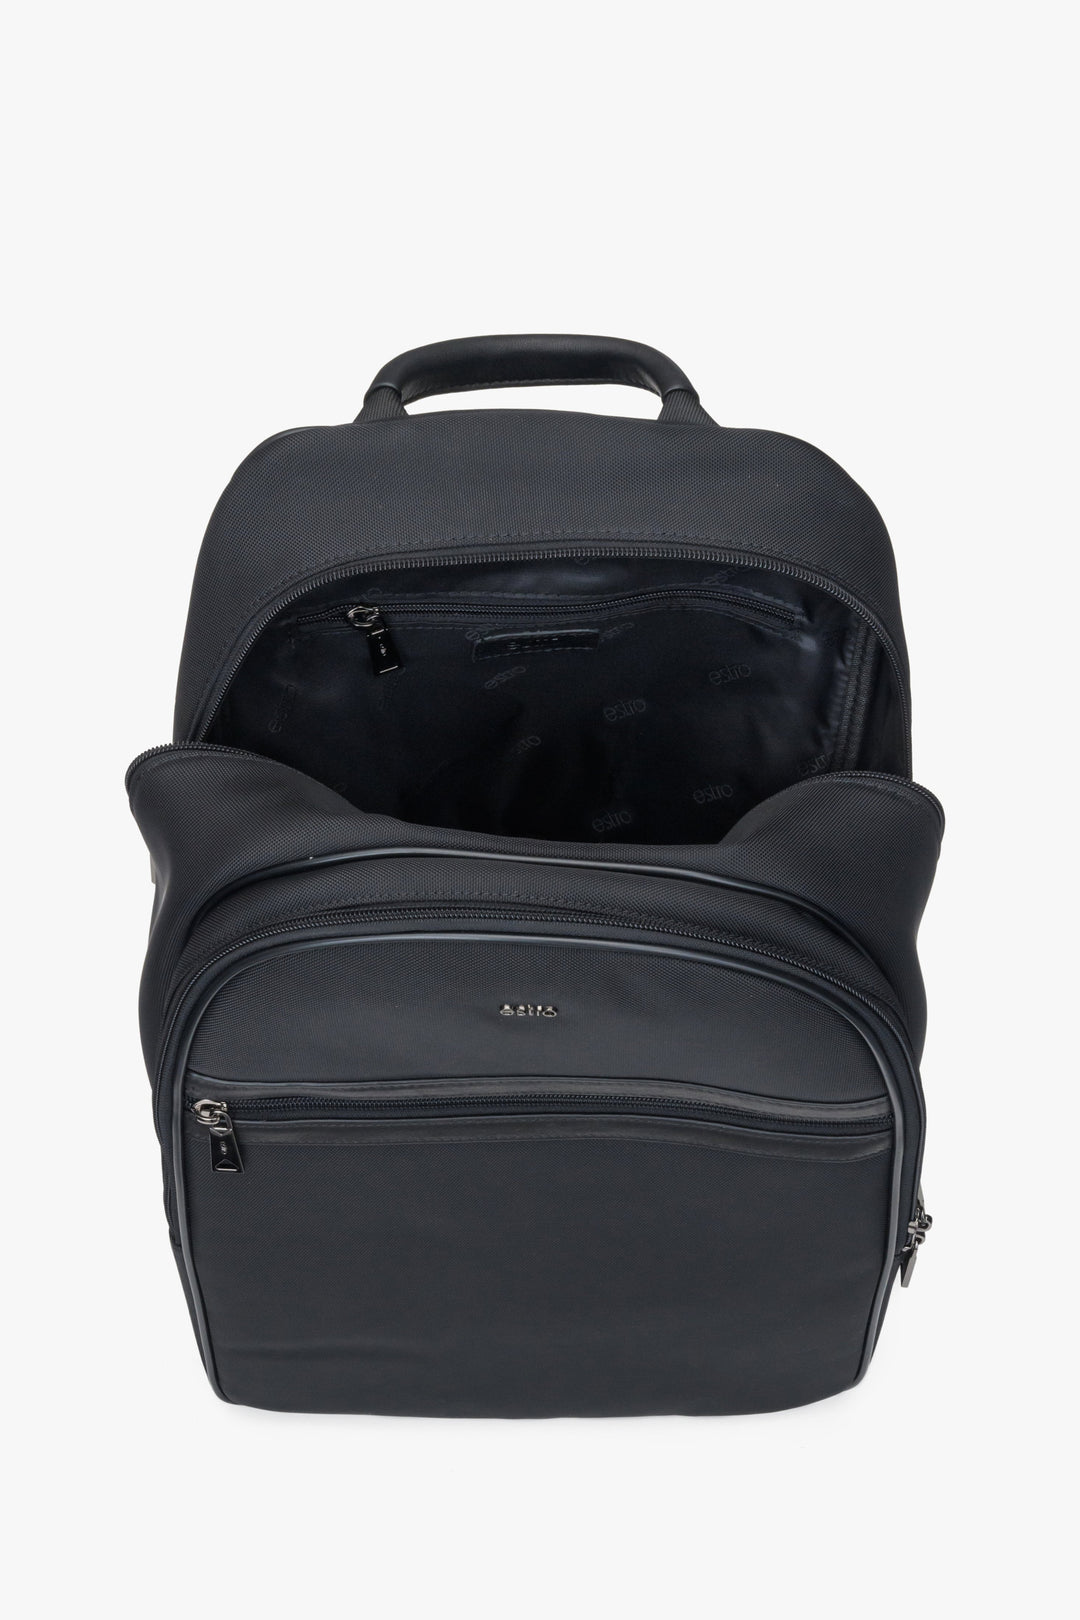 Men's black  backpack with adjustable straps by Estro - close-up on the interior of the model.